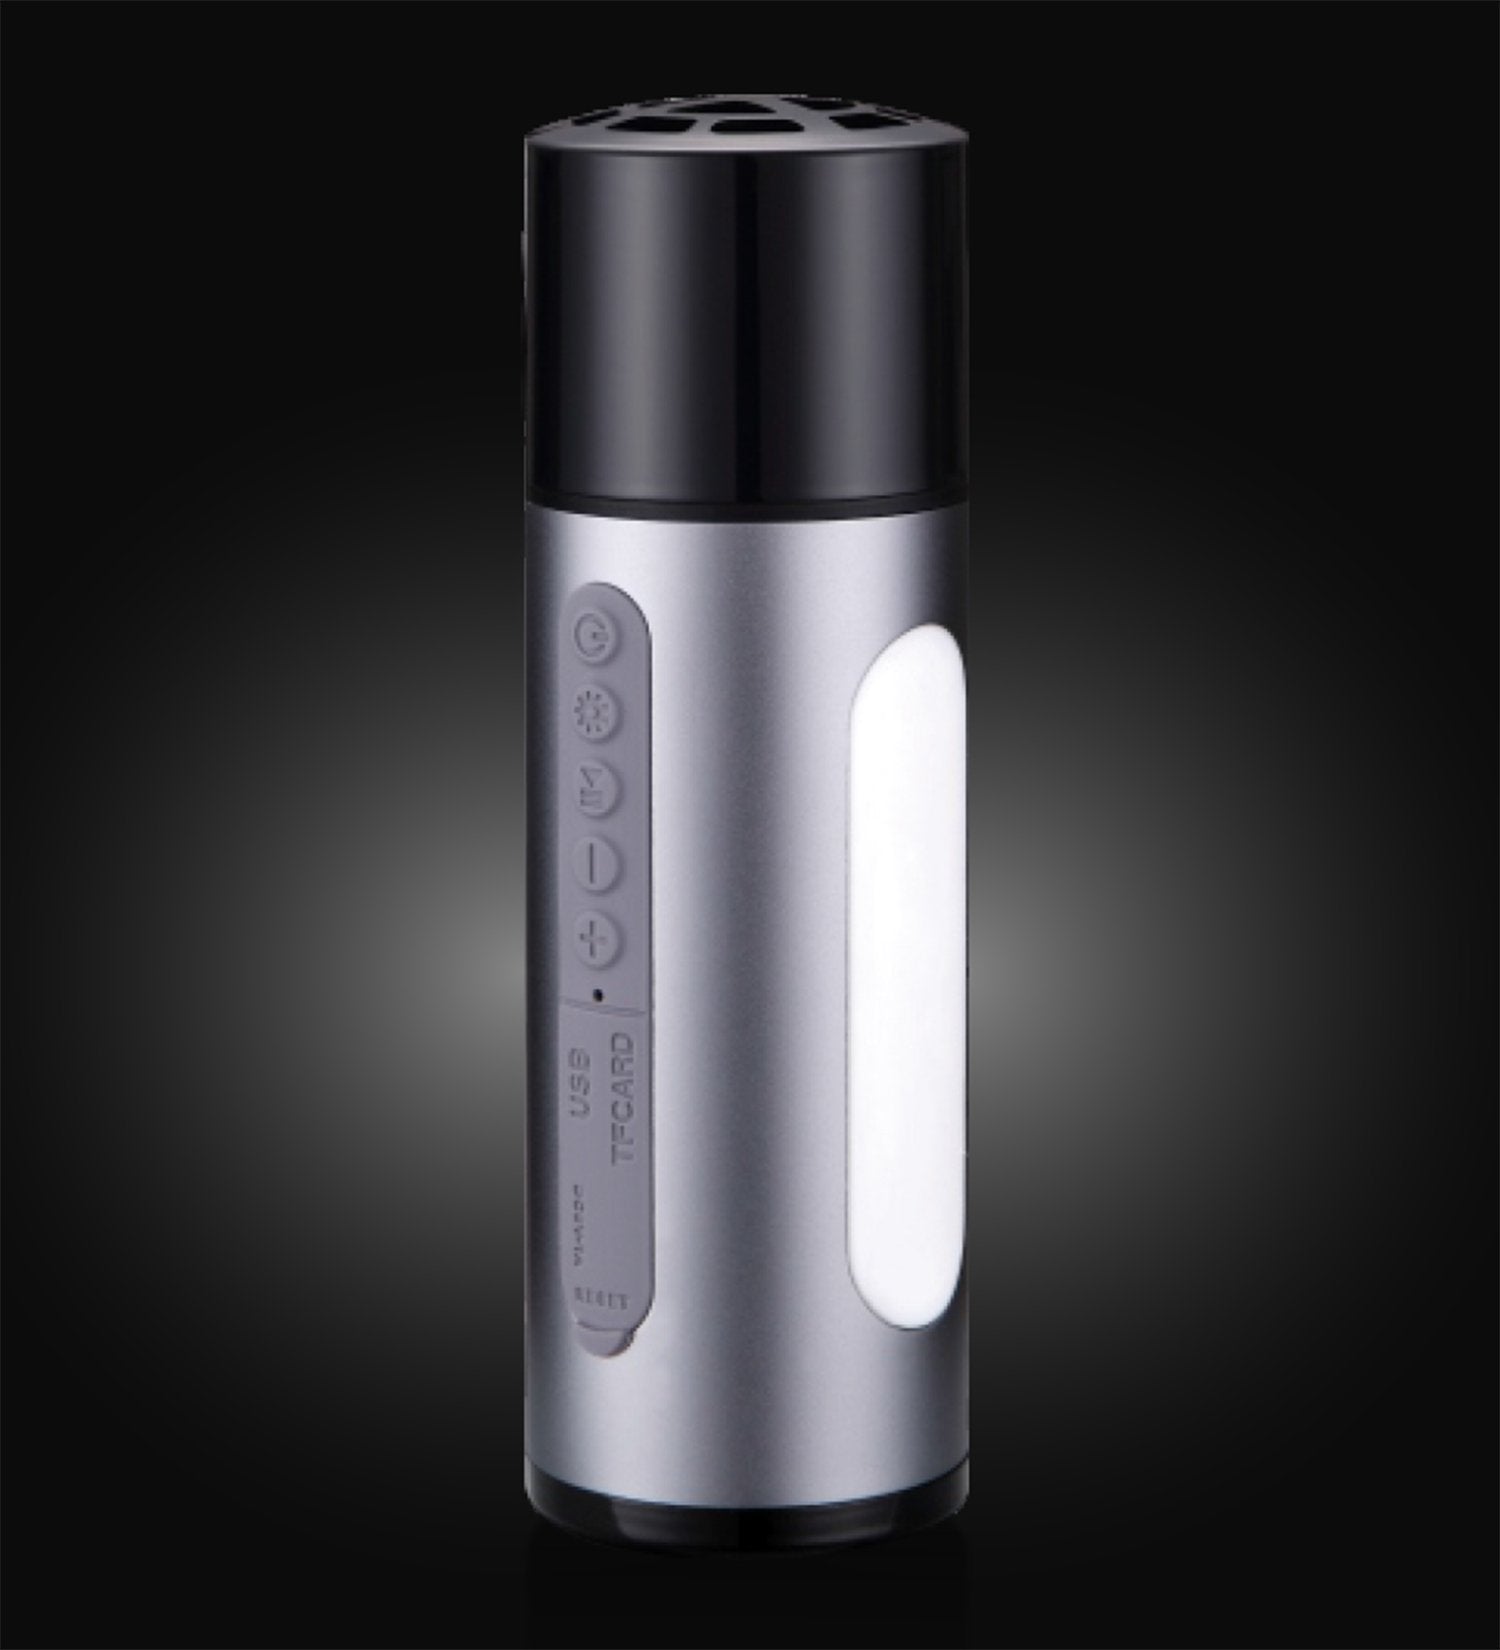 4 in 1 BT Speaker - Powerbank - LED - Hand-free - MX02 - Sunny Stores Sunny Stores Silver Matrix